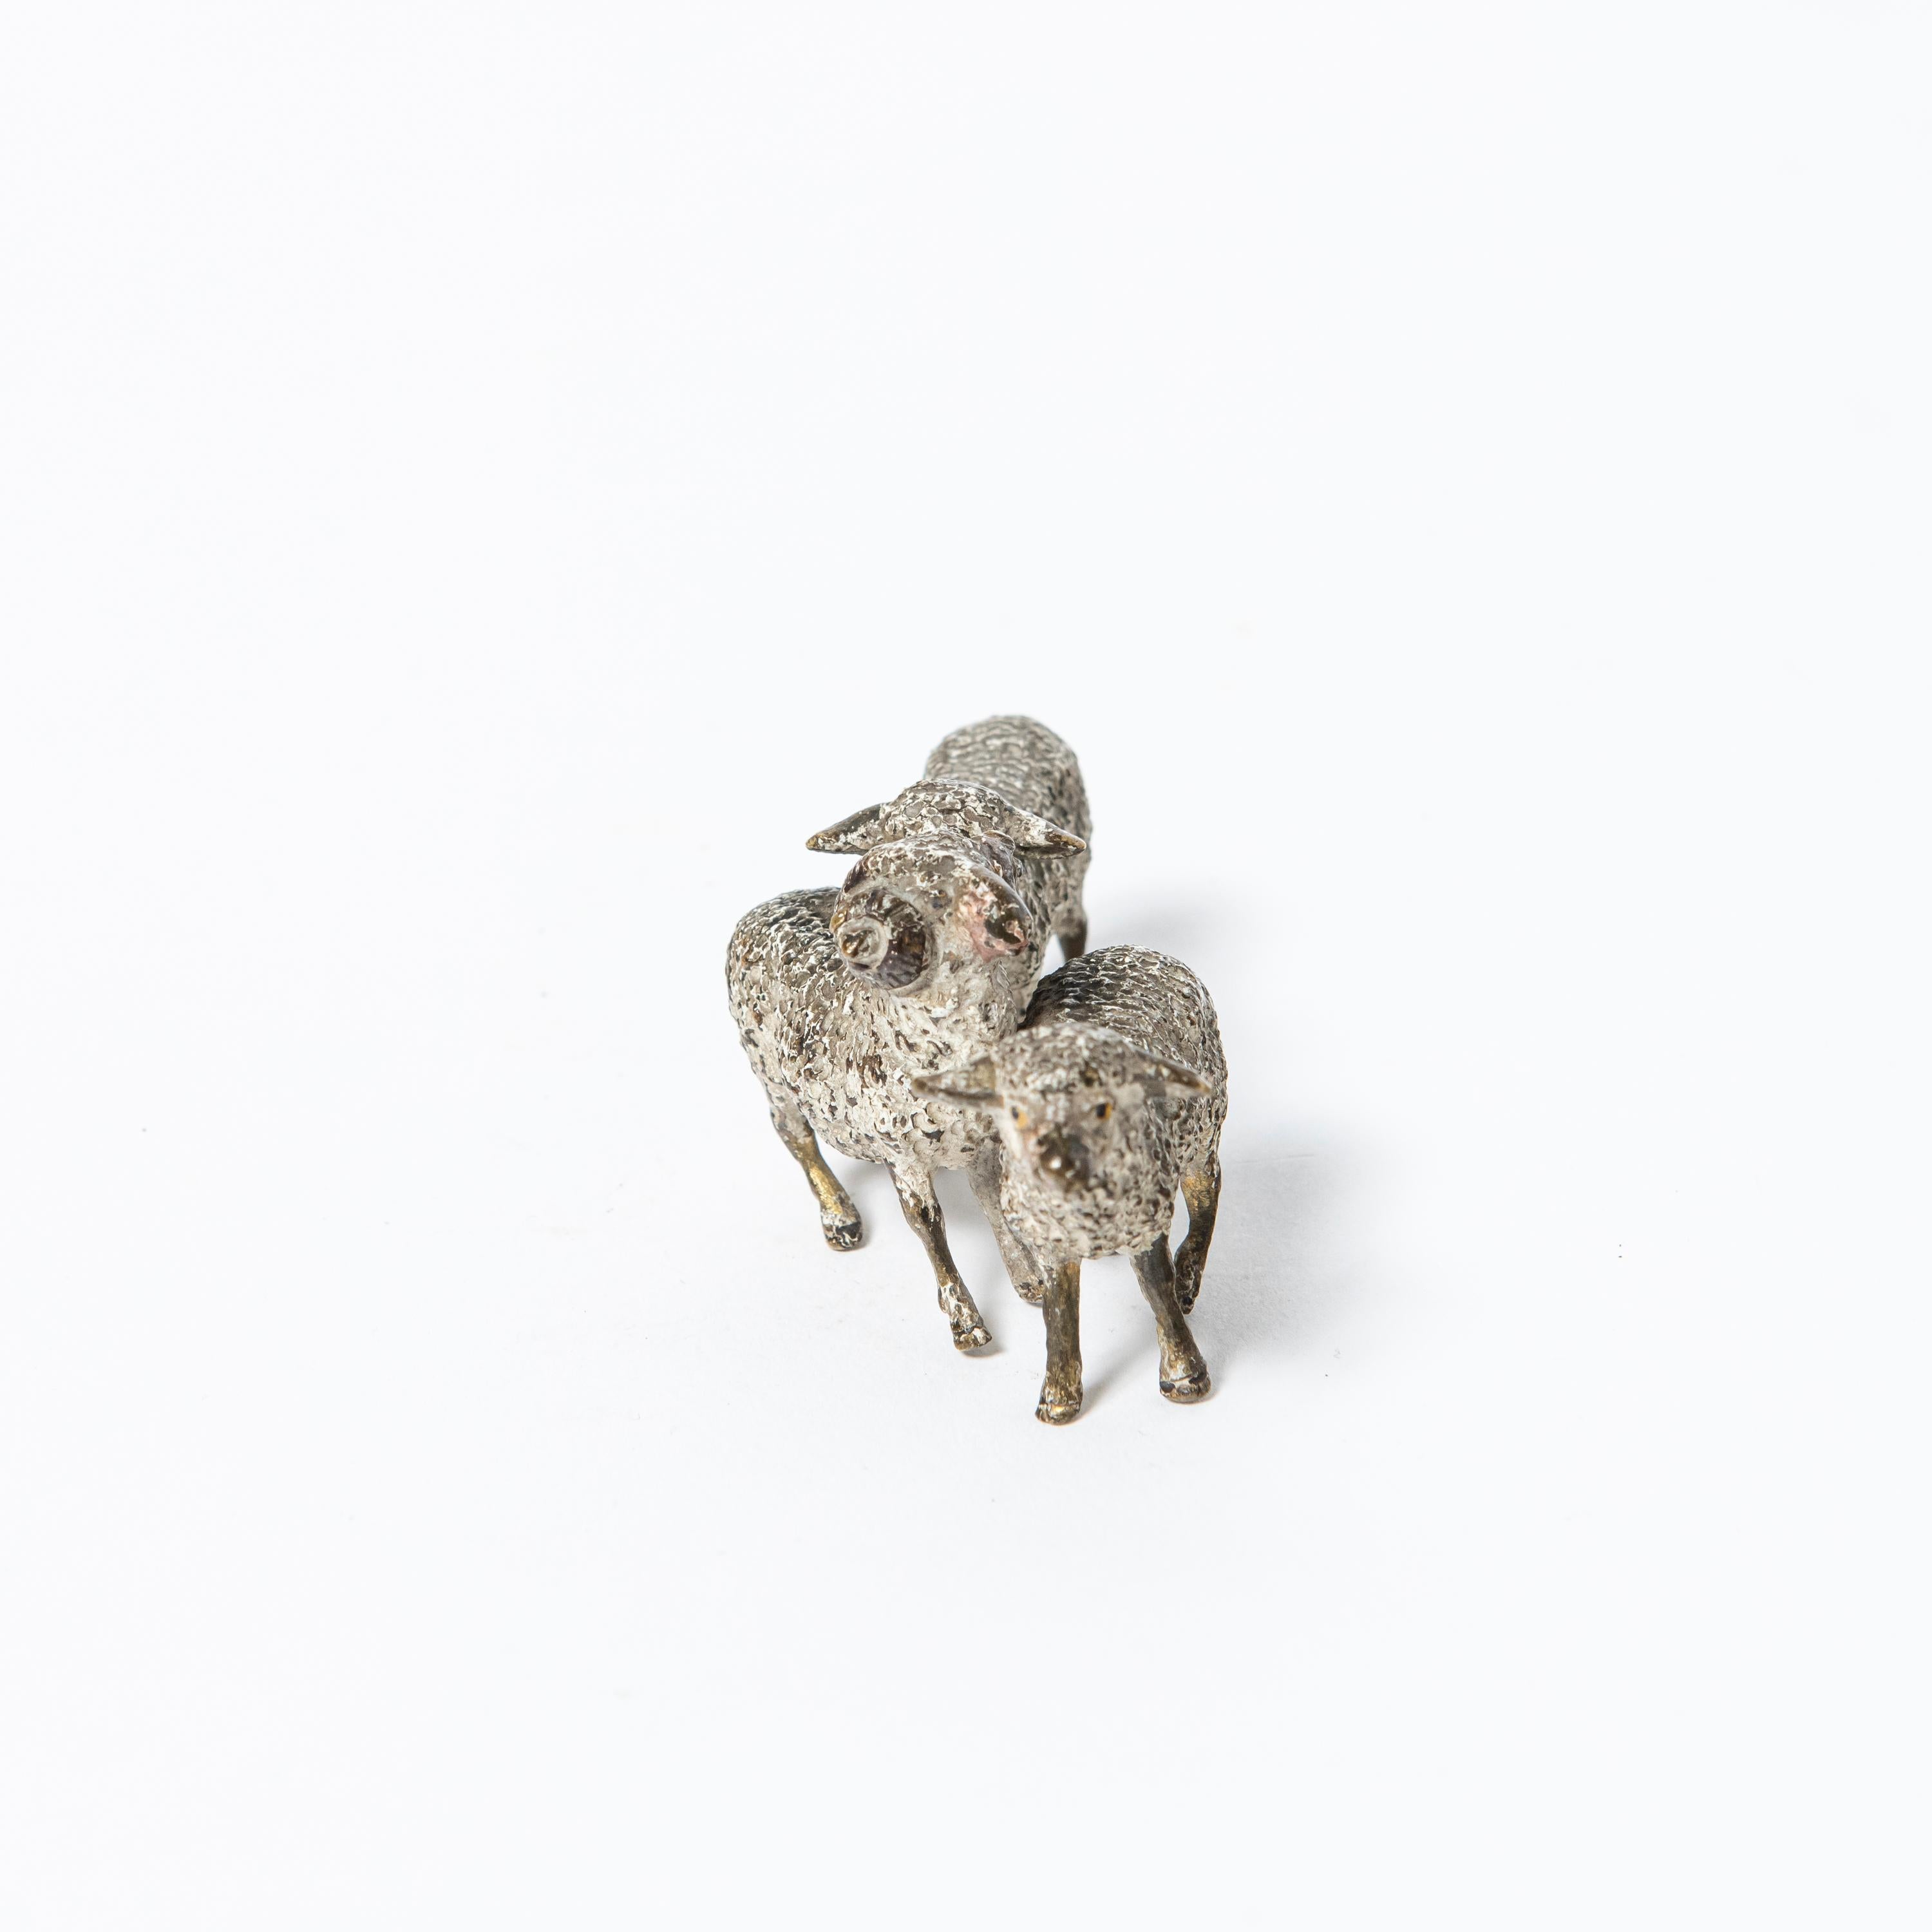 Cold-painted bronze sheeps sculpture attributed to Franz Bergmann. Austria, early 20th century.